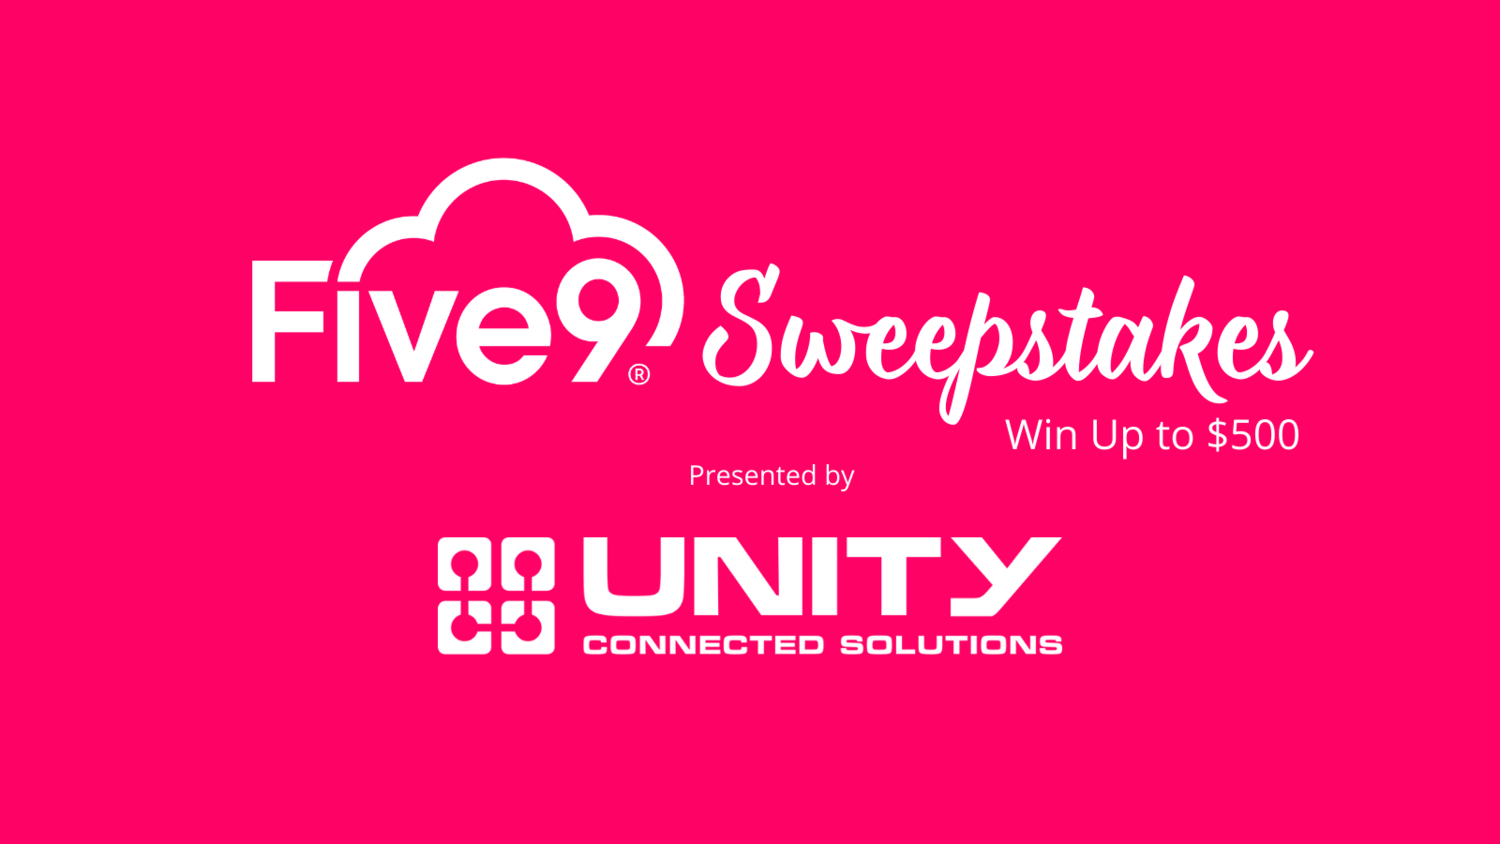 online contests, sweepstakes and giveaways - Five9 Sweepstakes — Unity Connected Solutions